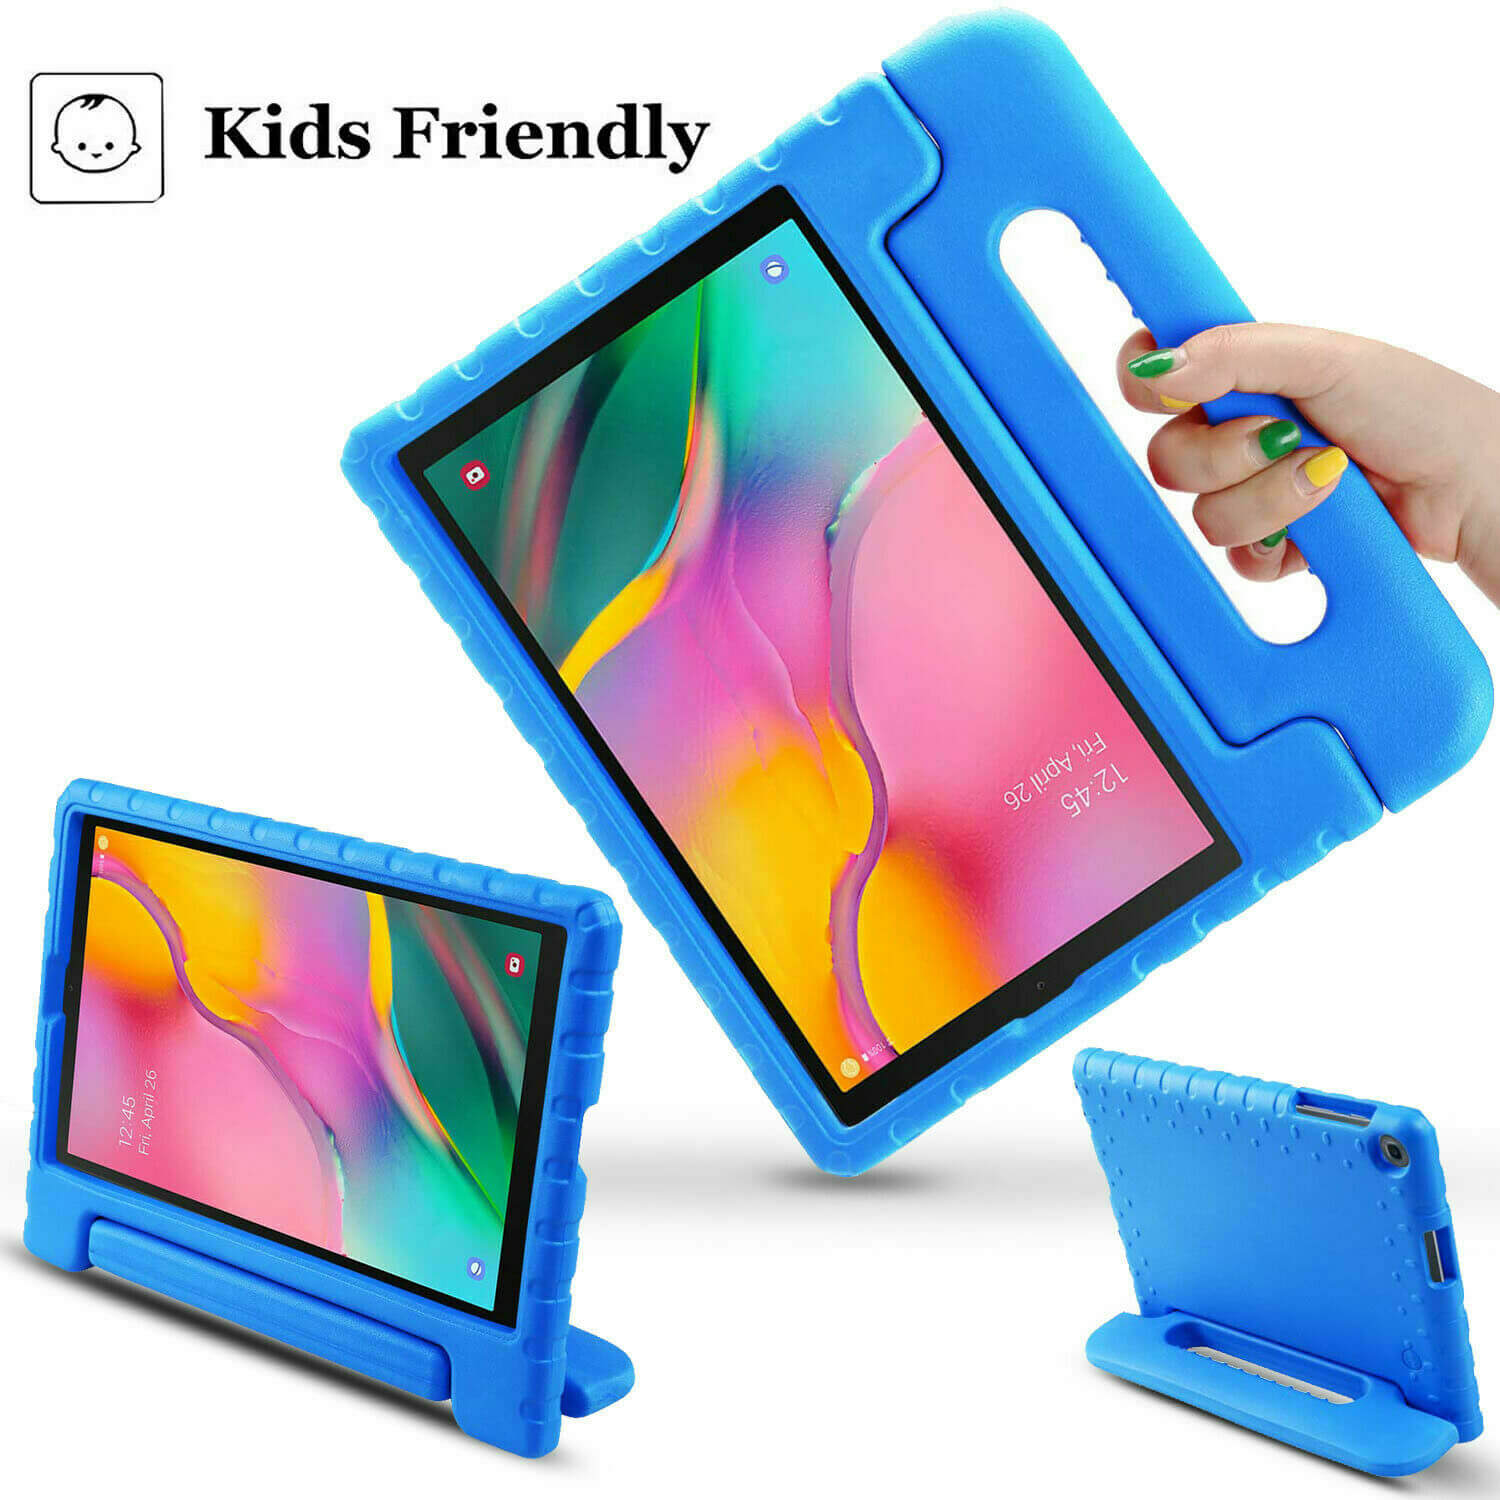 For Samsung Galaxy Tab A 8.0" 2019 Kids Case Shockproof Cover With Stand Blue